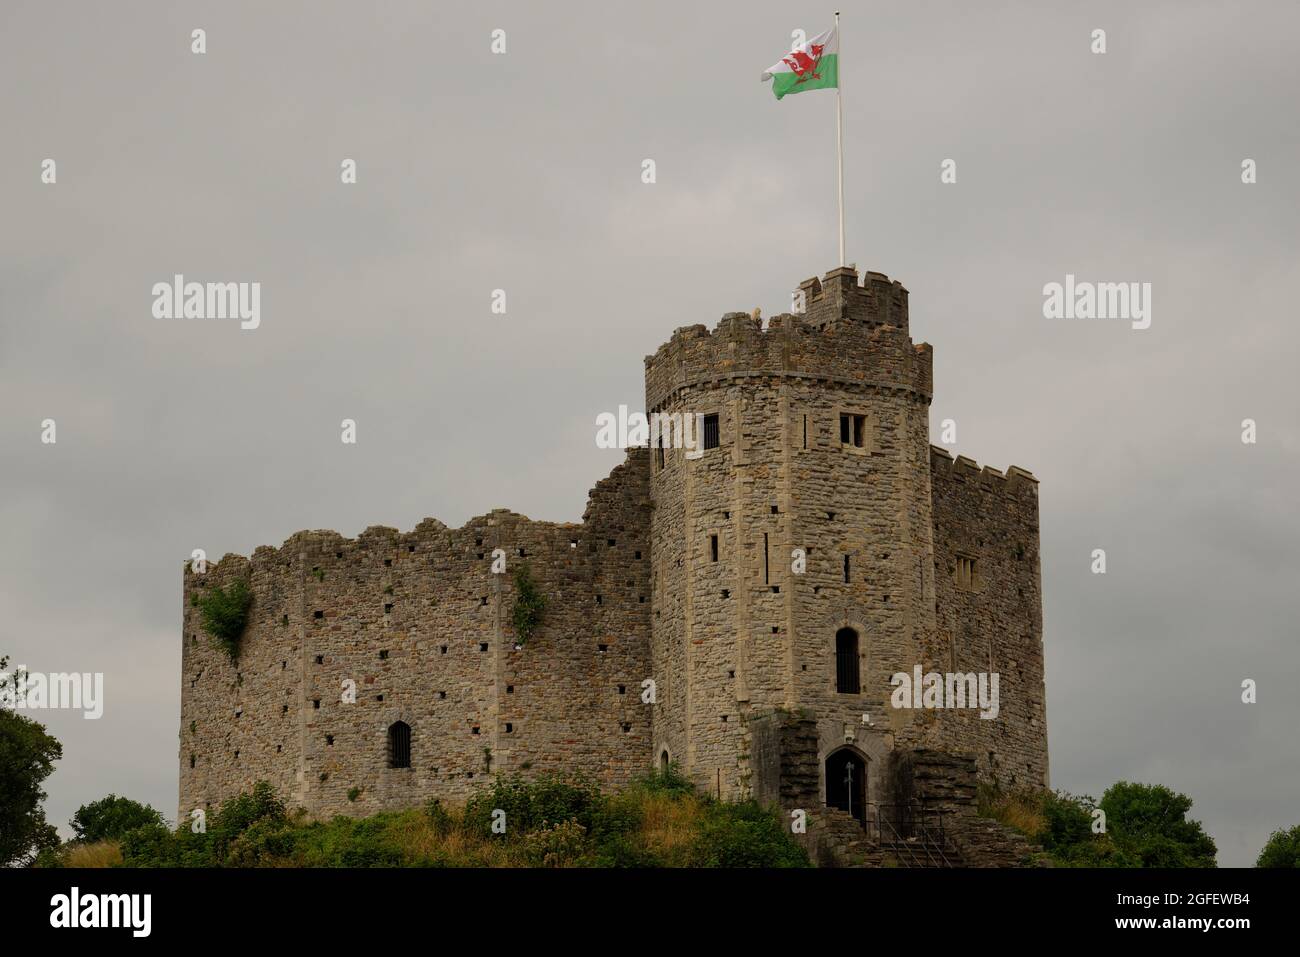 Cardiff Castle on a cloudy grey day. Stock Photo